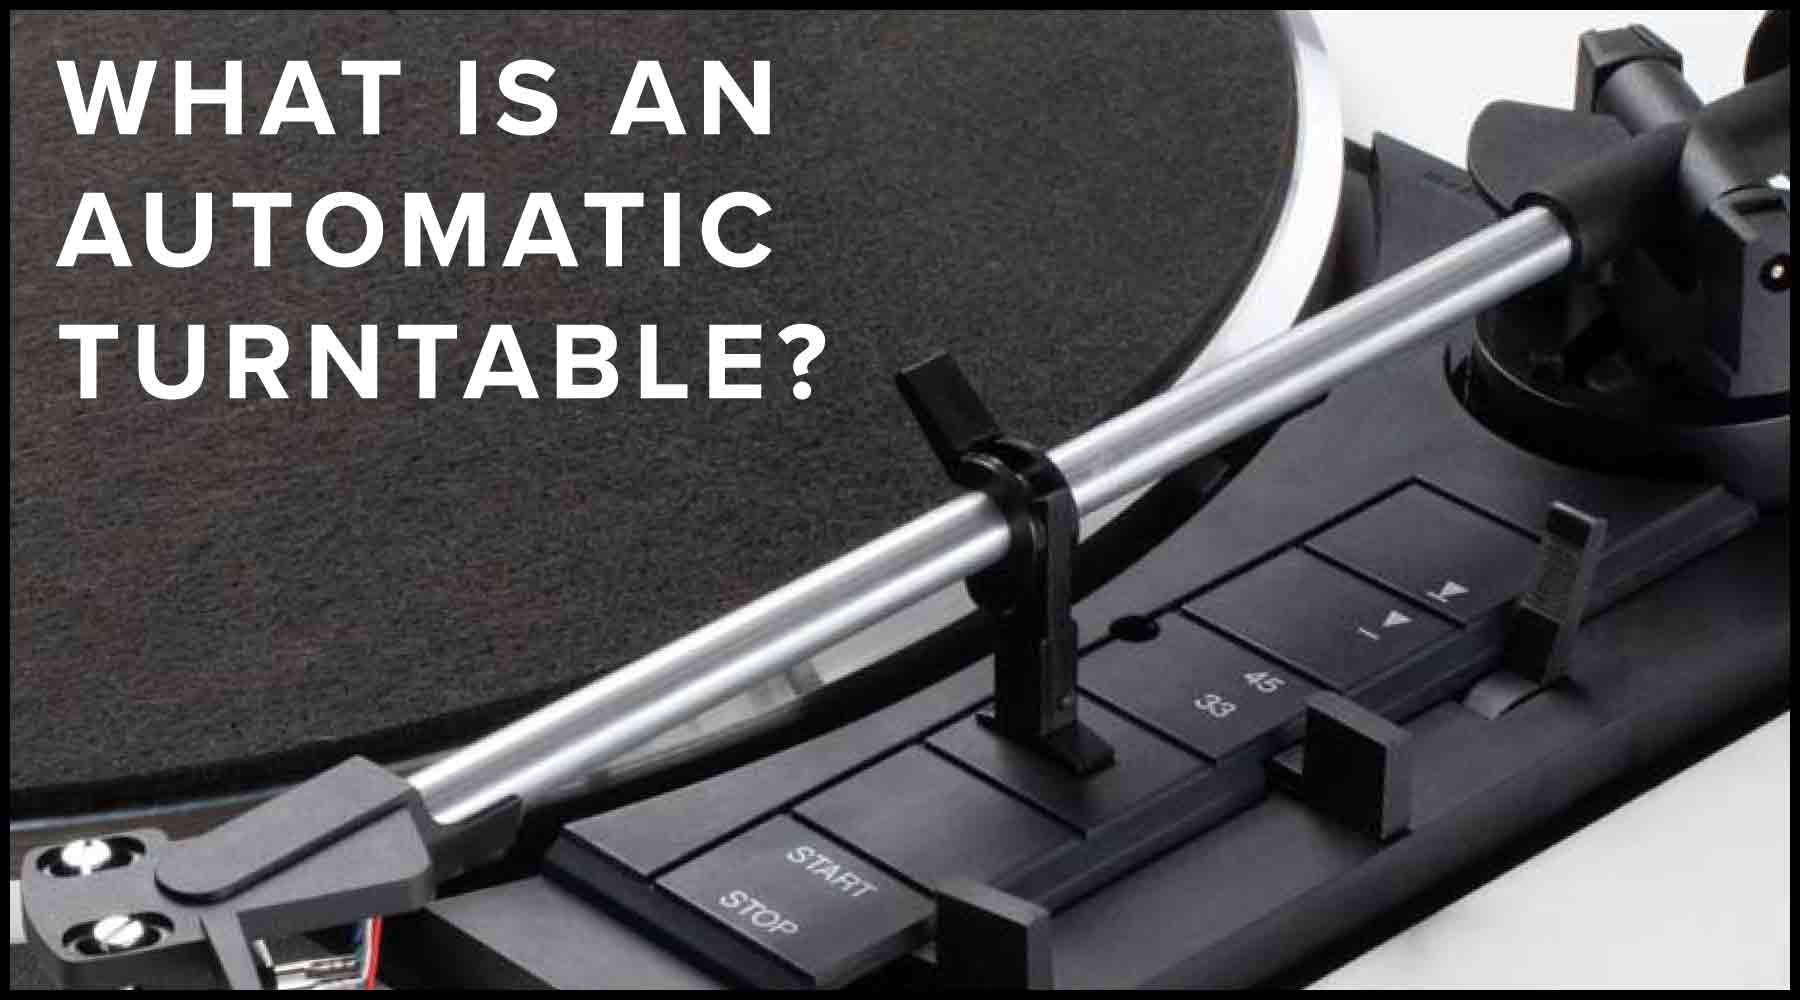 What is an Automatic Turntable?